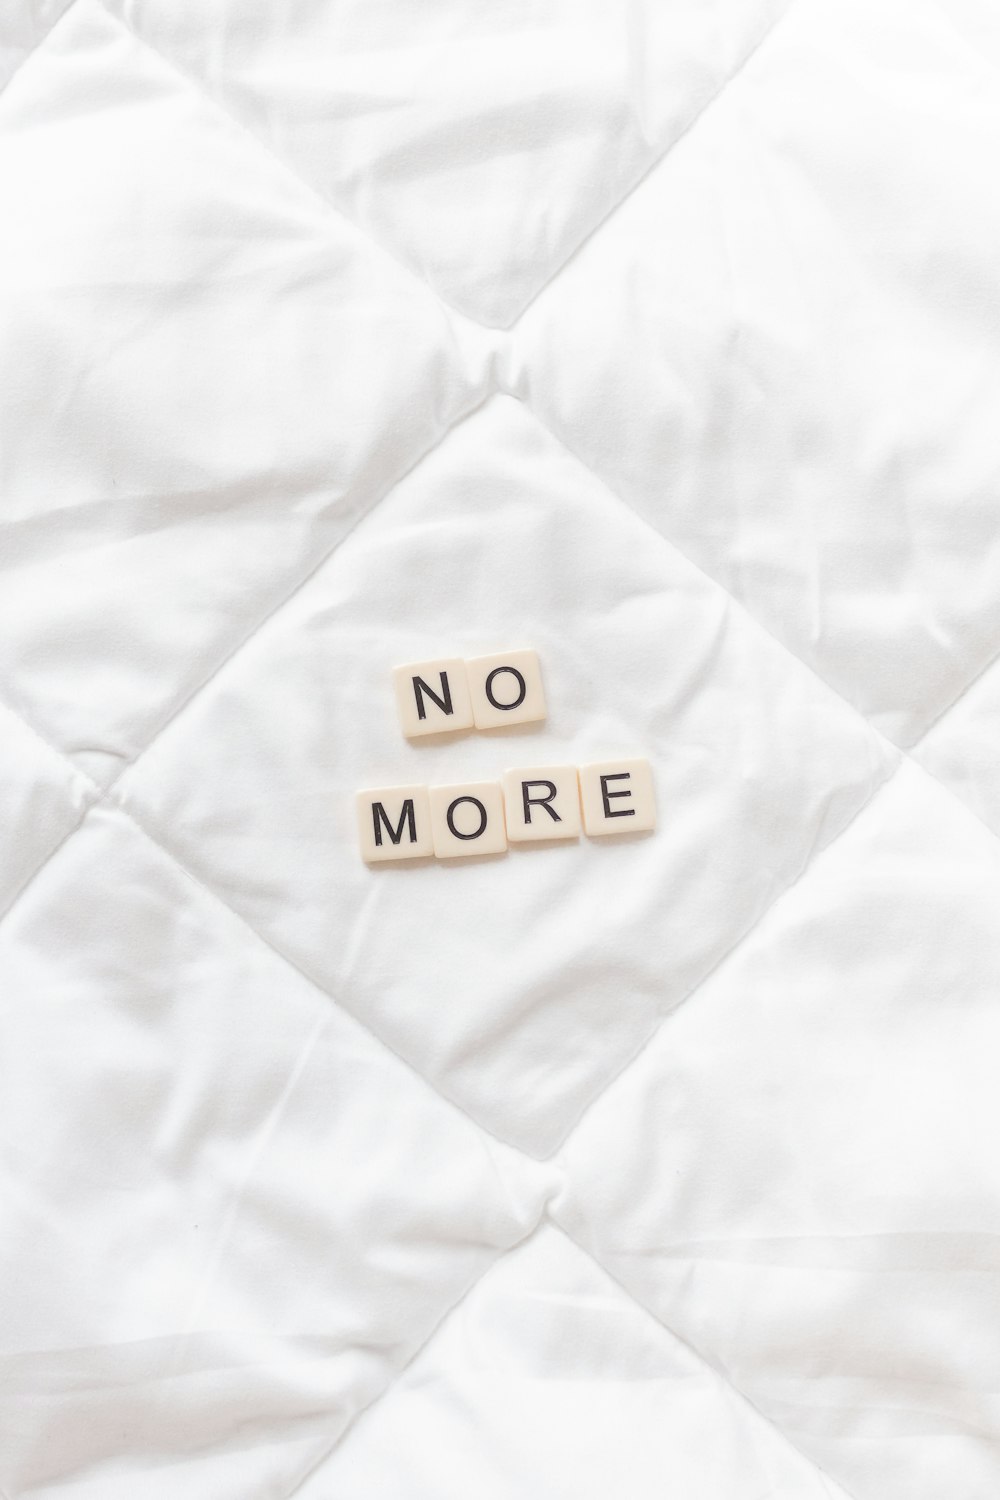 a close up of a white quilt with words written on it